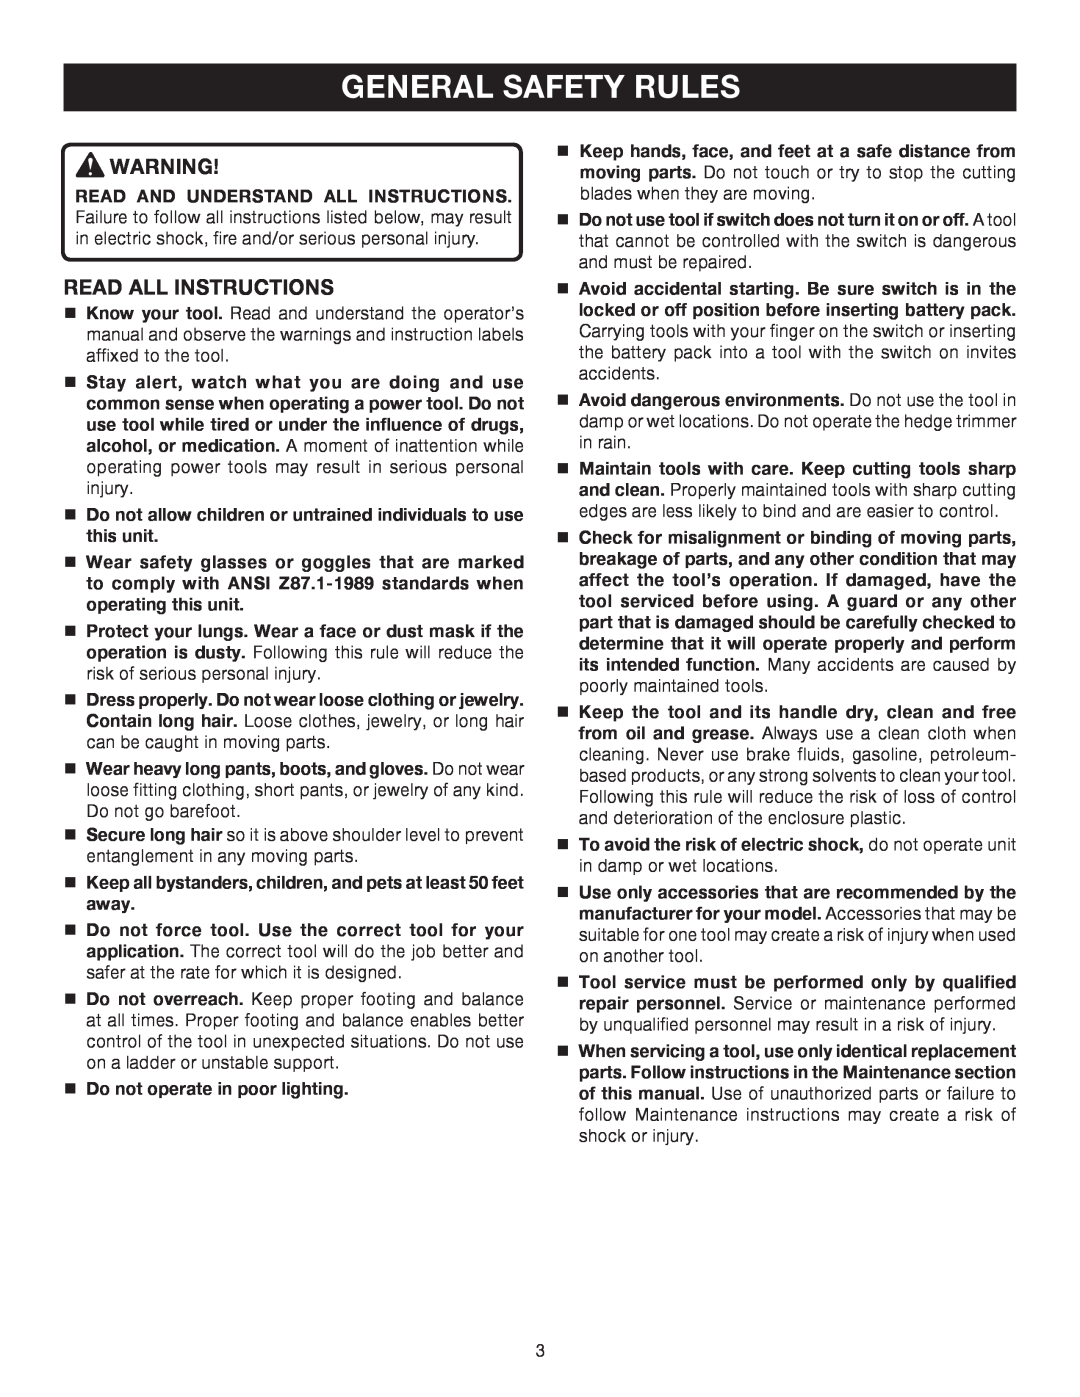 Ryobi P2600A manual General Safety Rules, Read All Instructions 